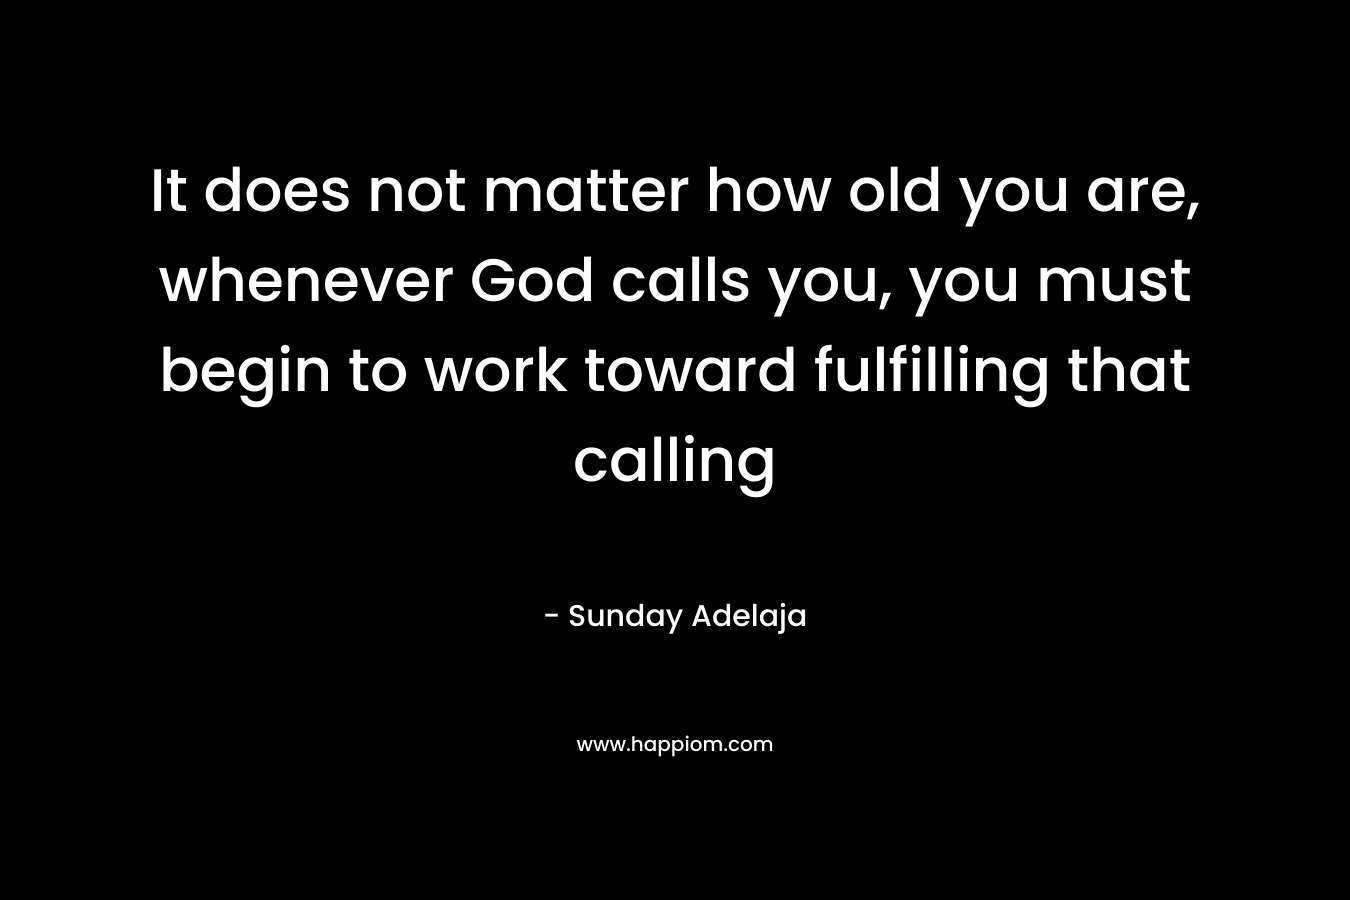 It does not matter how old you are, whenever God calls you, you must begin to work toward fulfilling that calling